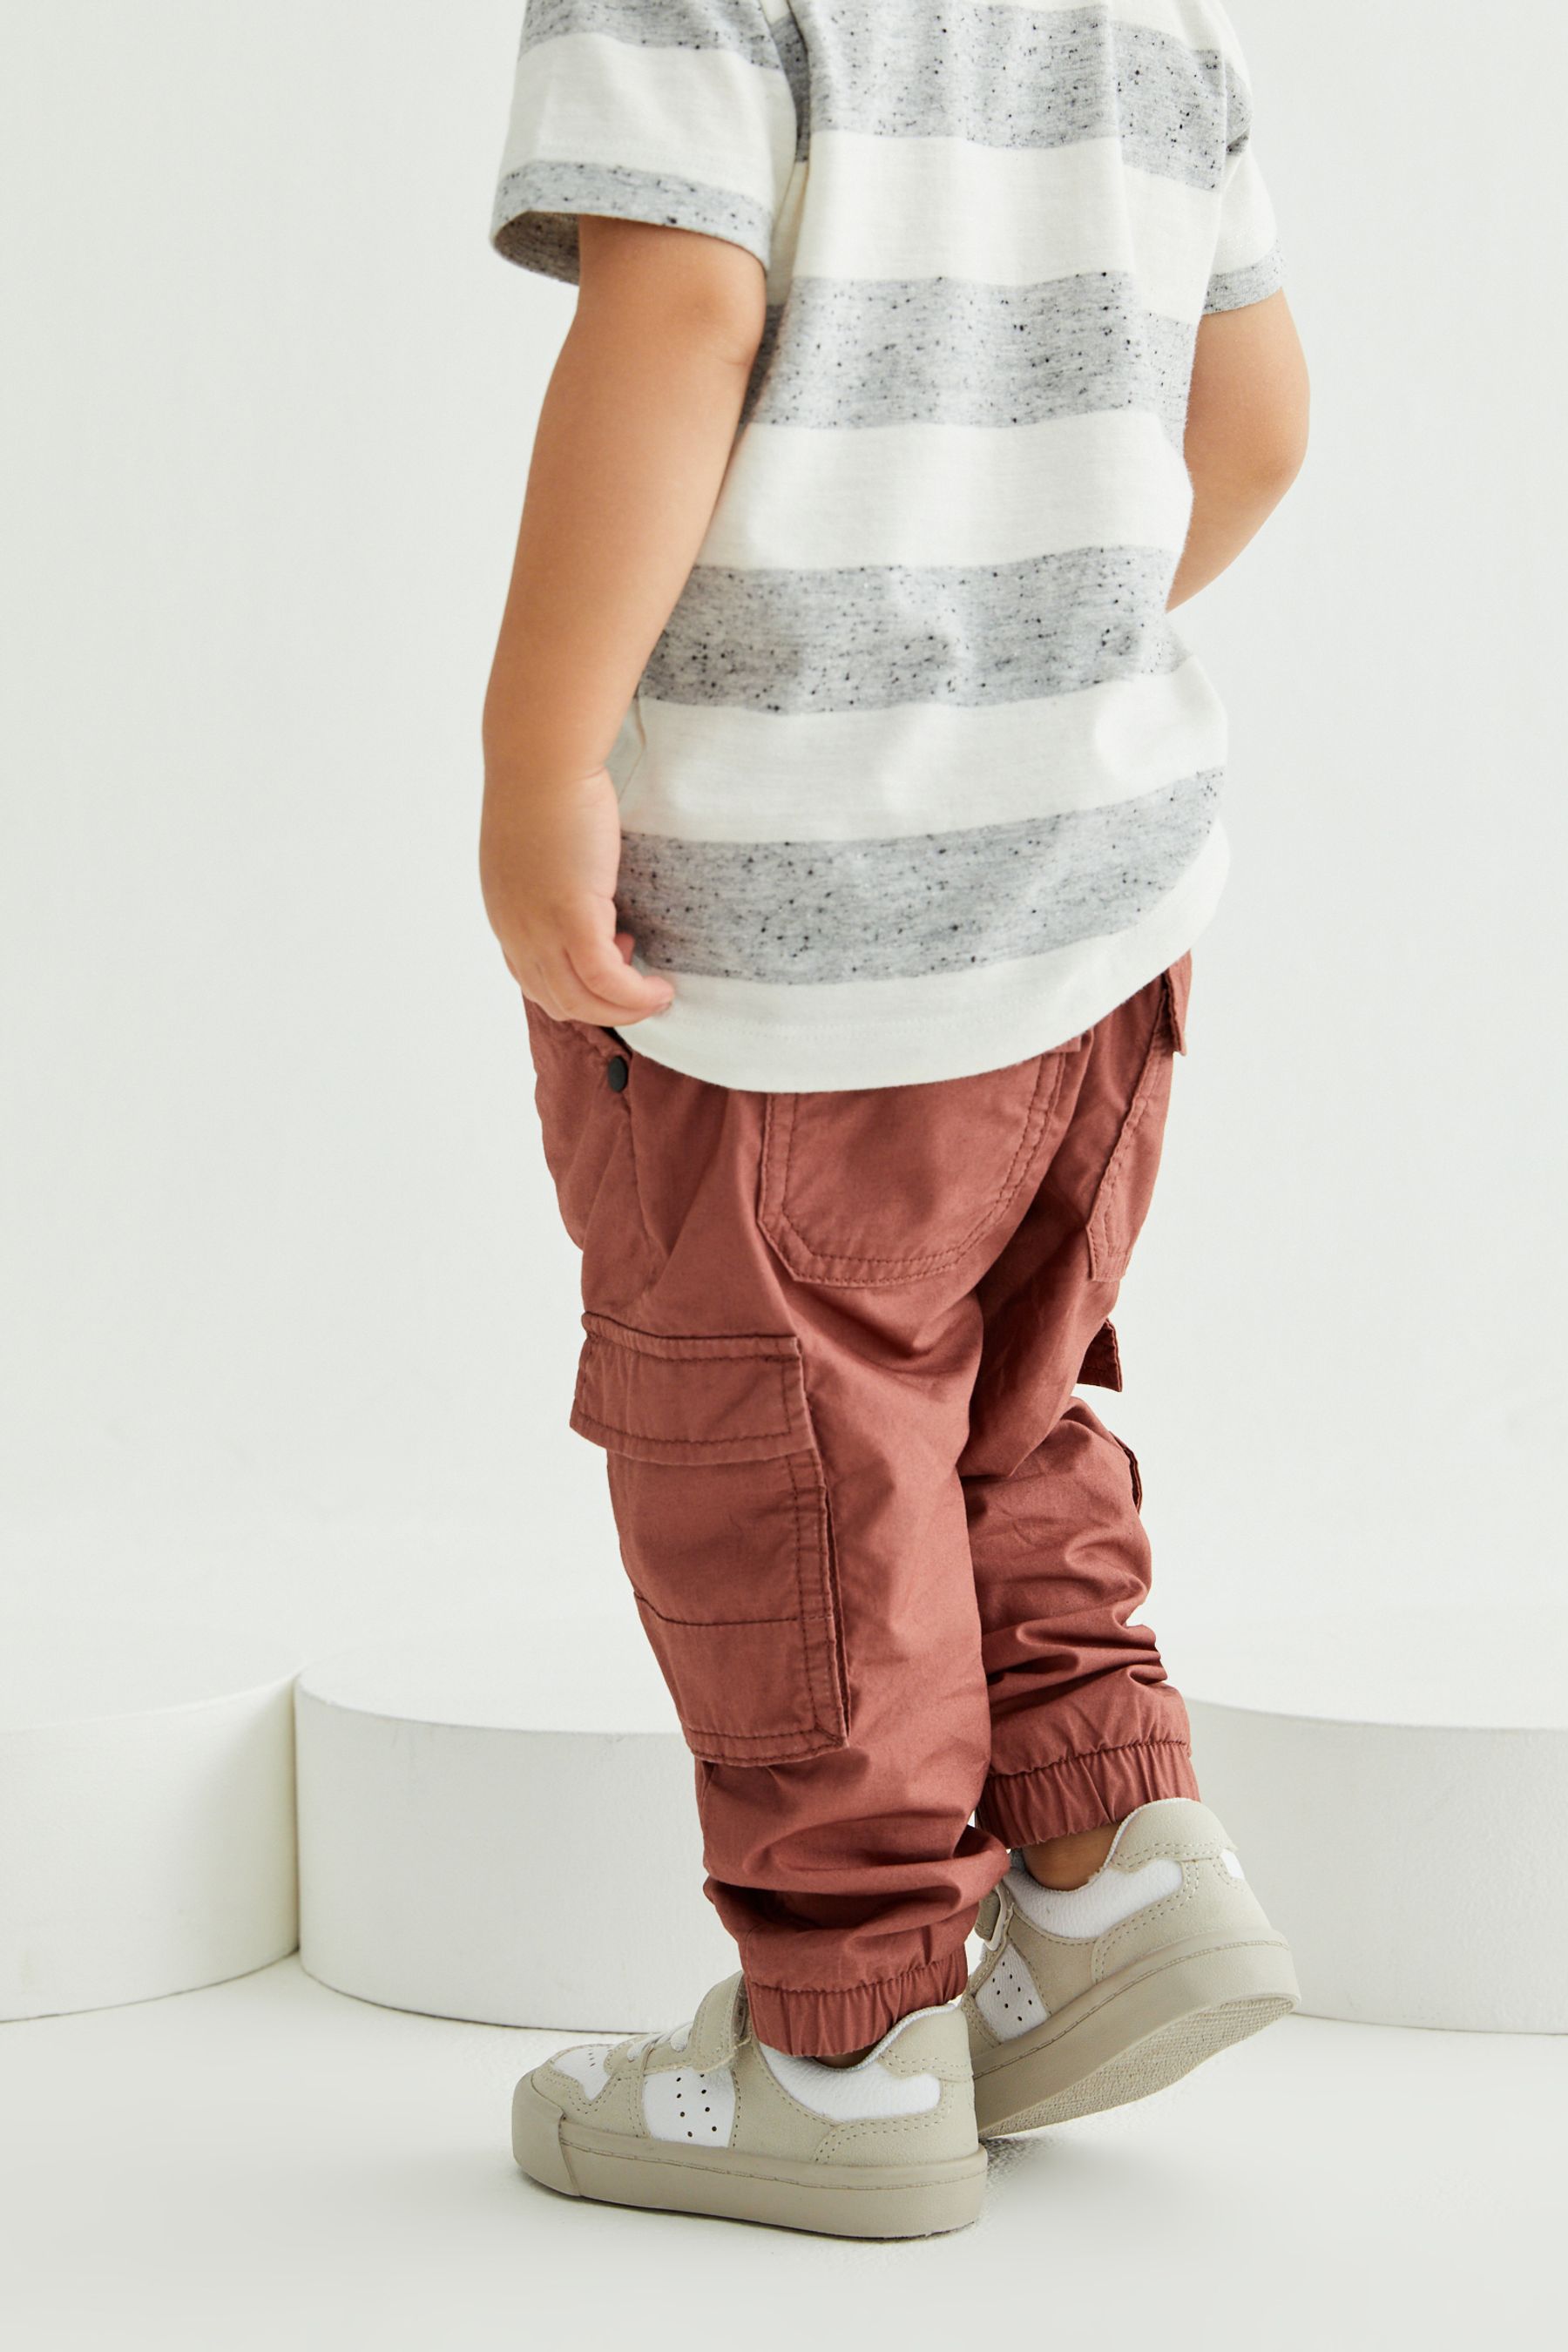 Lined Cargo Trousers (3mths-7yrs)